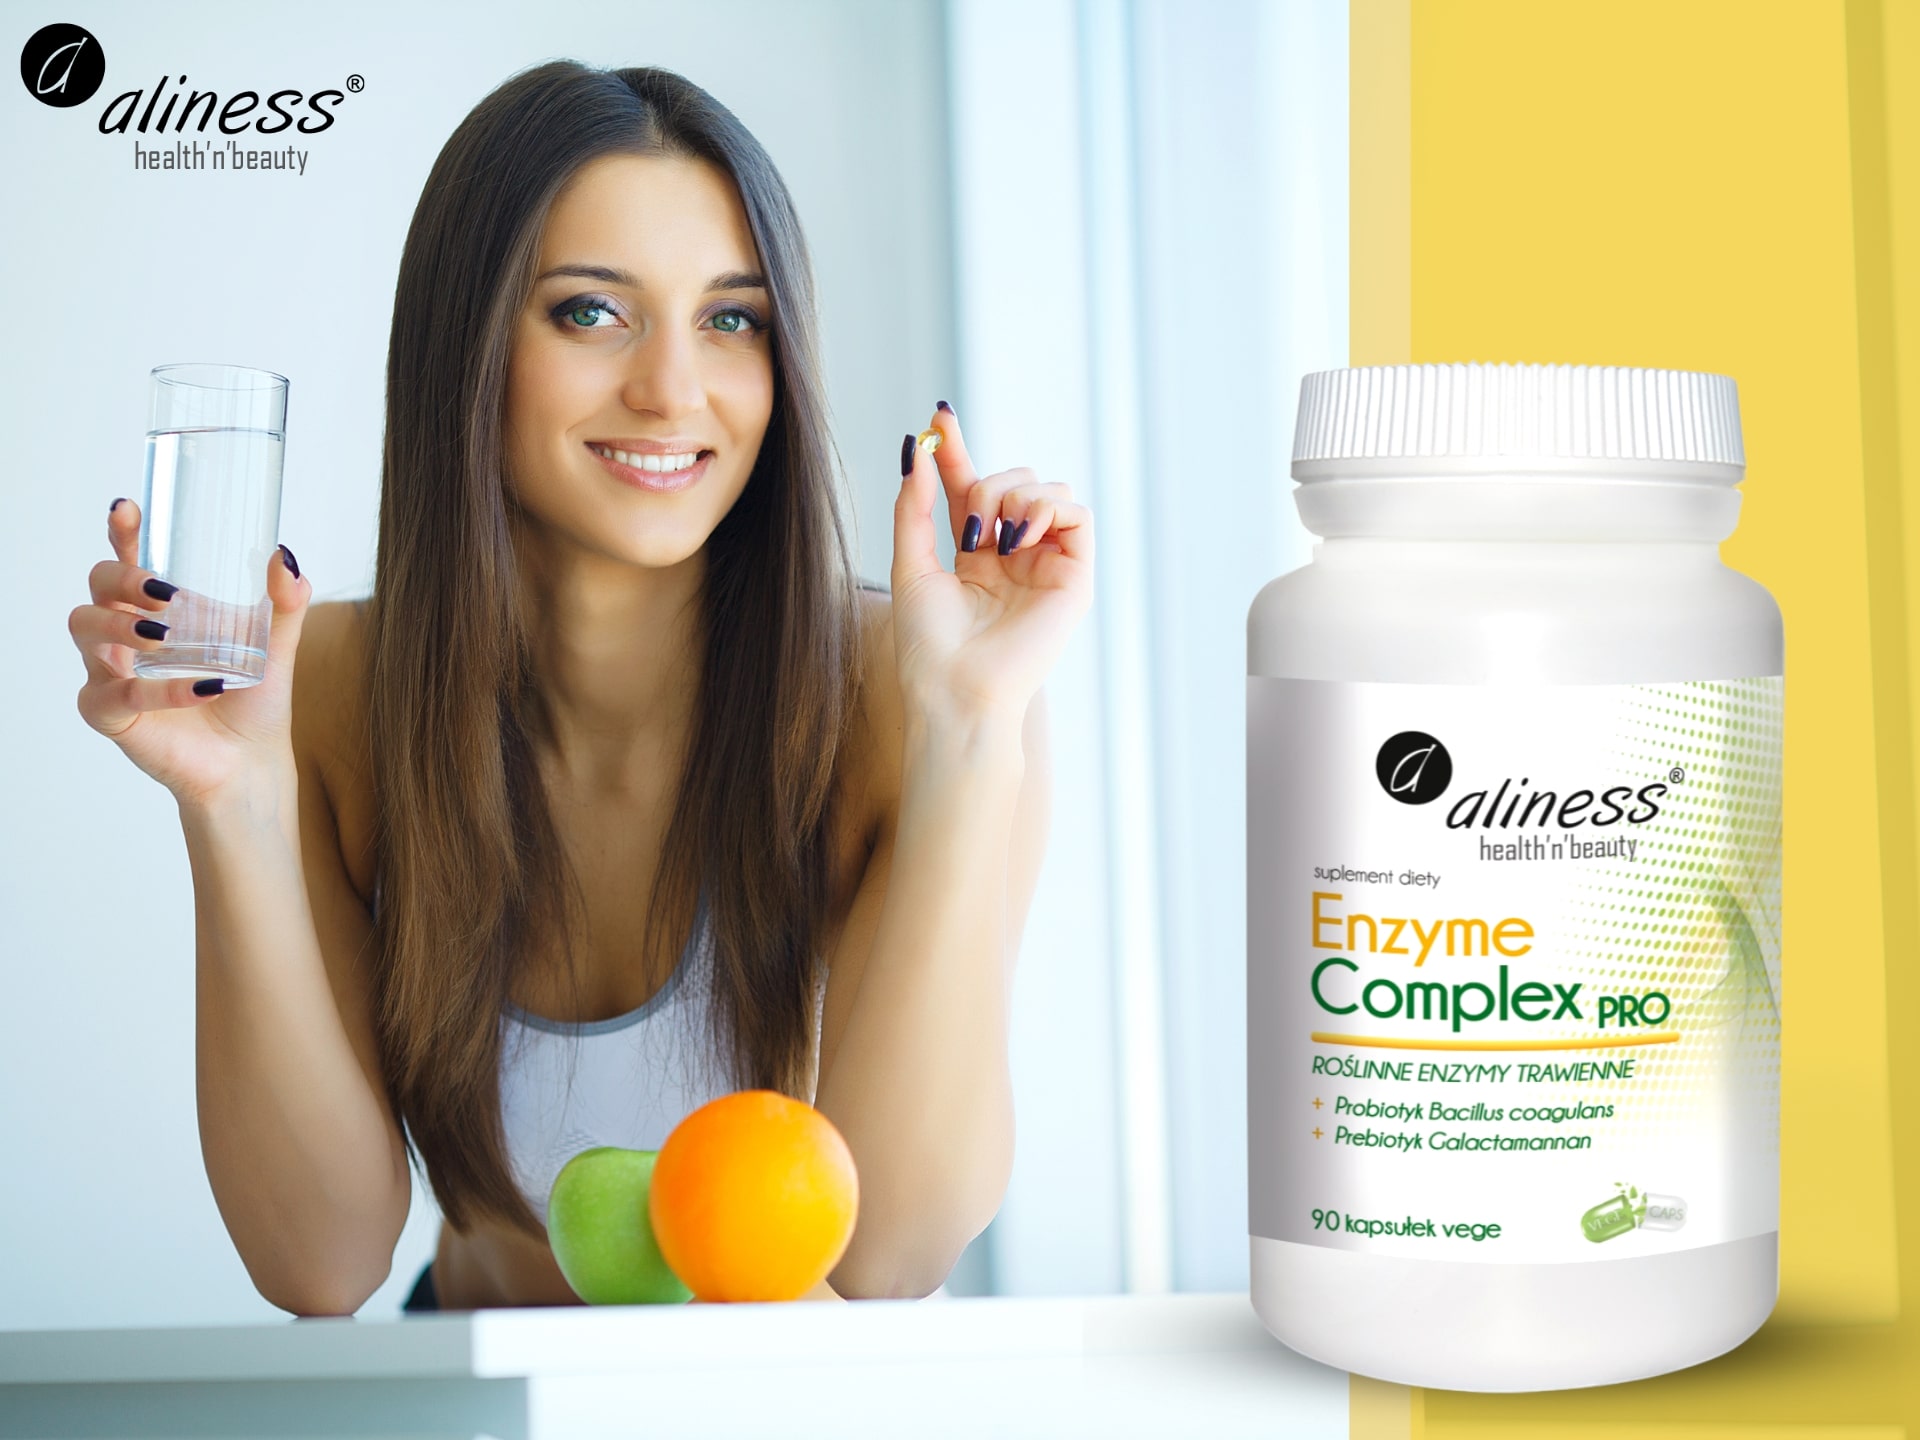 Aliness Enzyme Complex Pro